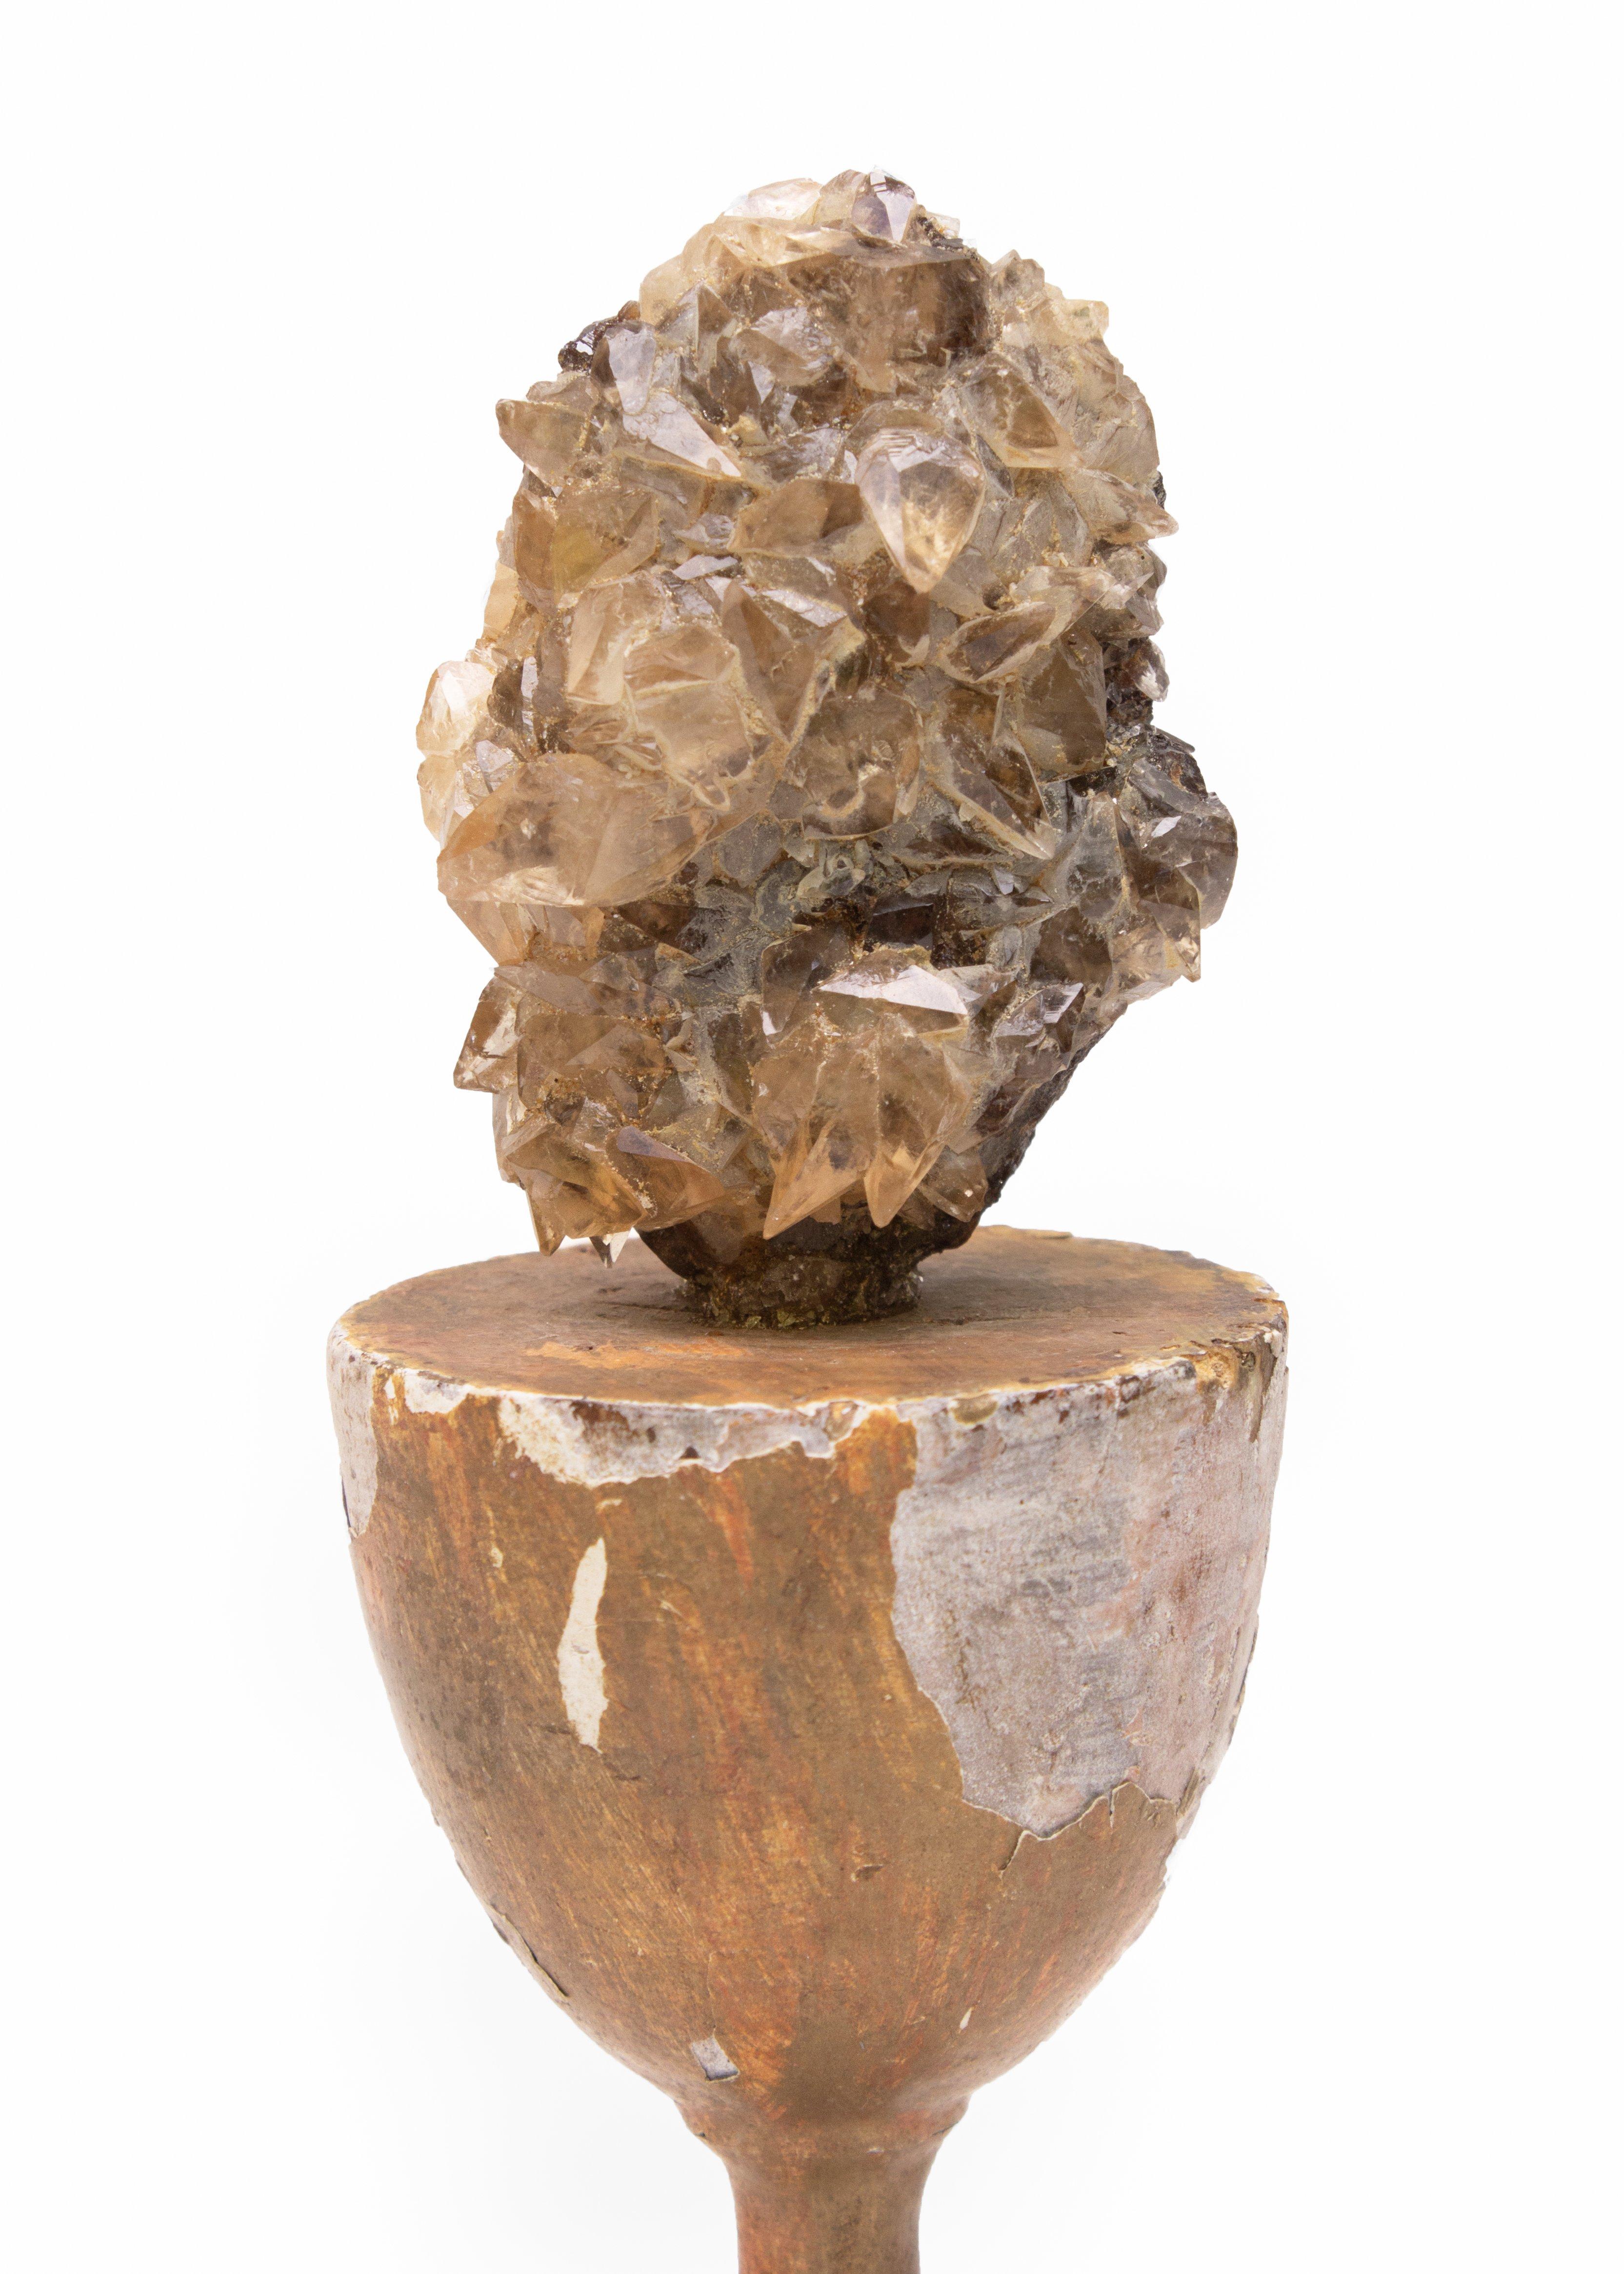 Sculptural 18th century Italian wood chalice decorated with calcite crystals in sphalerite on a Lucite base. The hand carved and painted chalice is from a church in Liguria, Italy. The calcite crystals formation comes from Elmwood Mine,